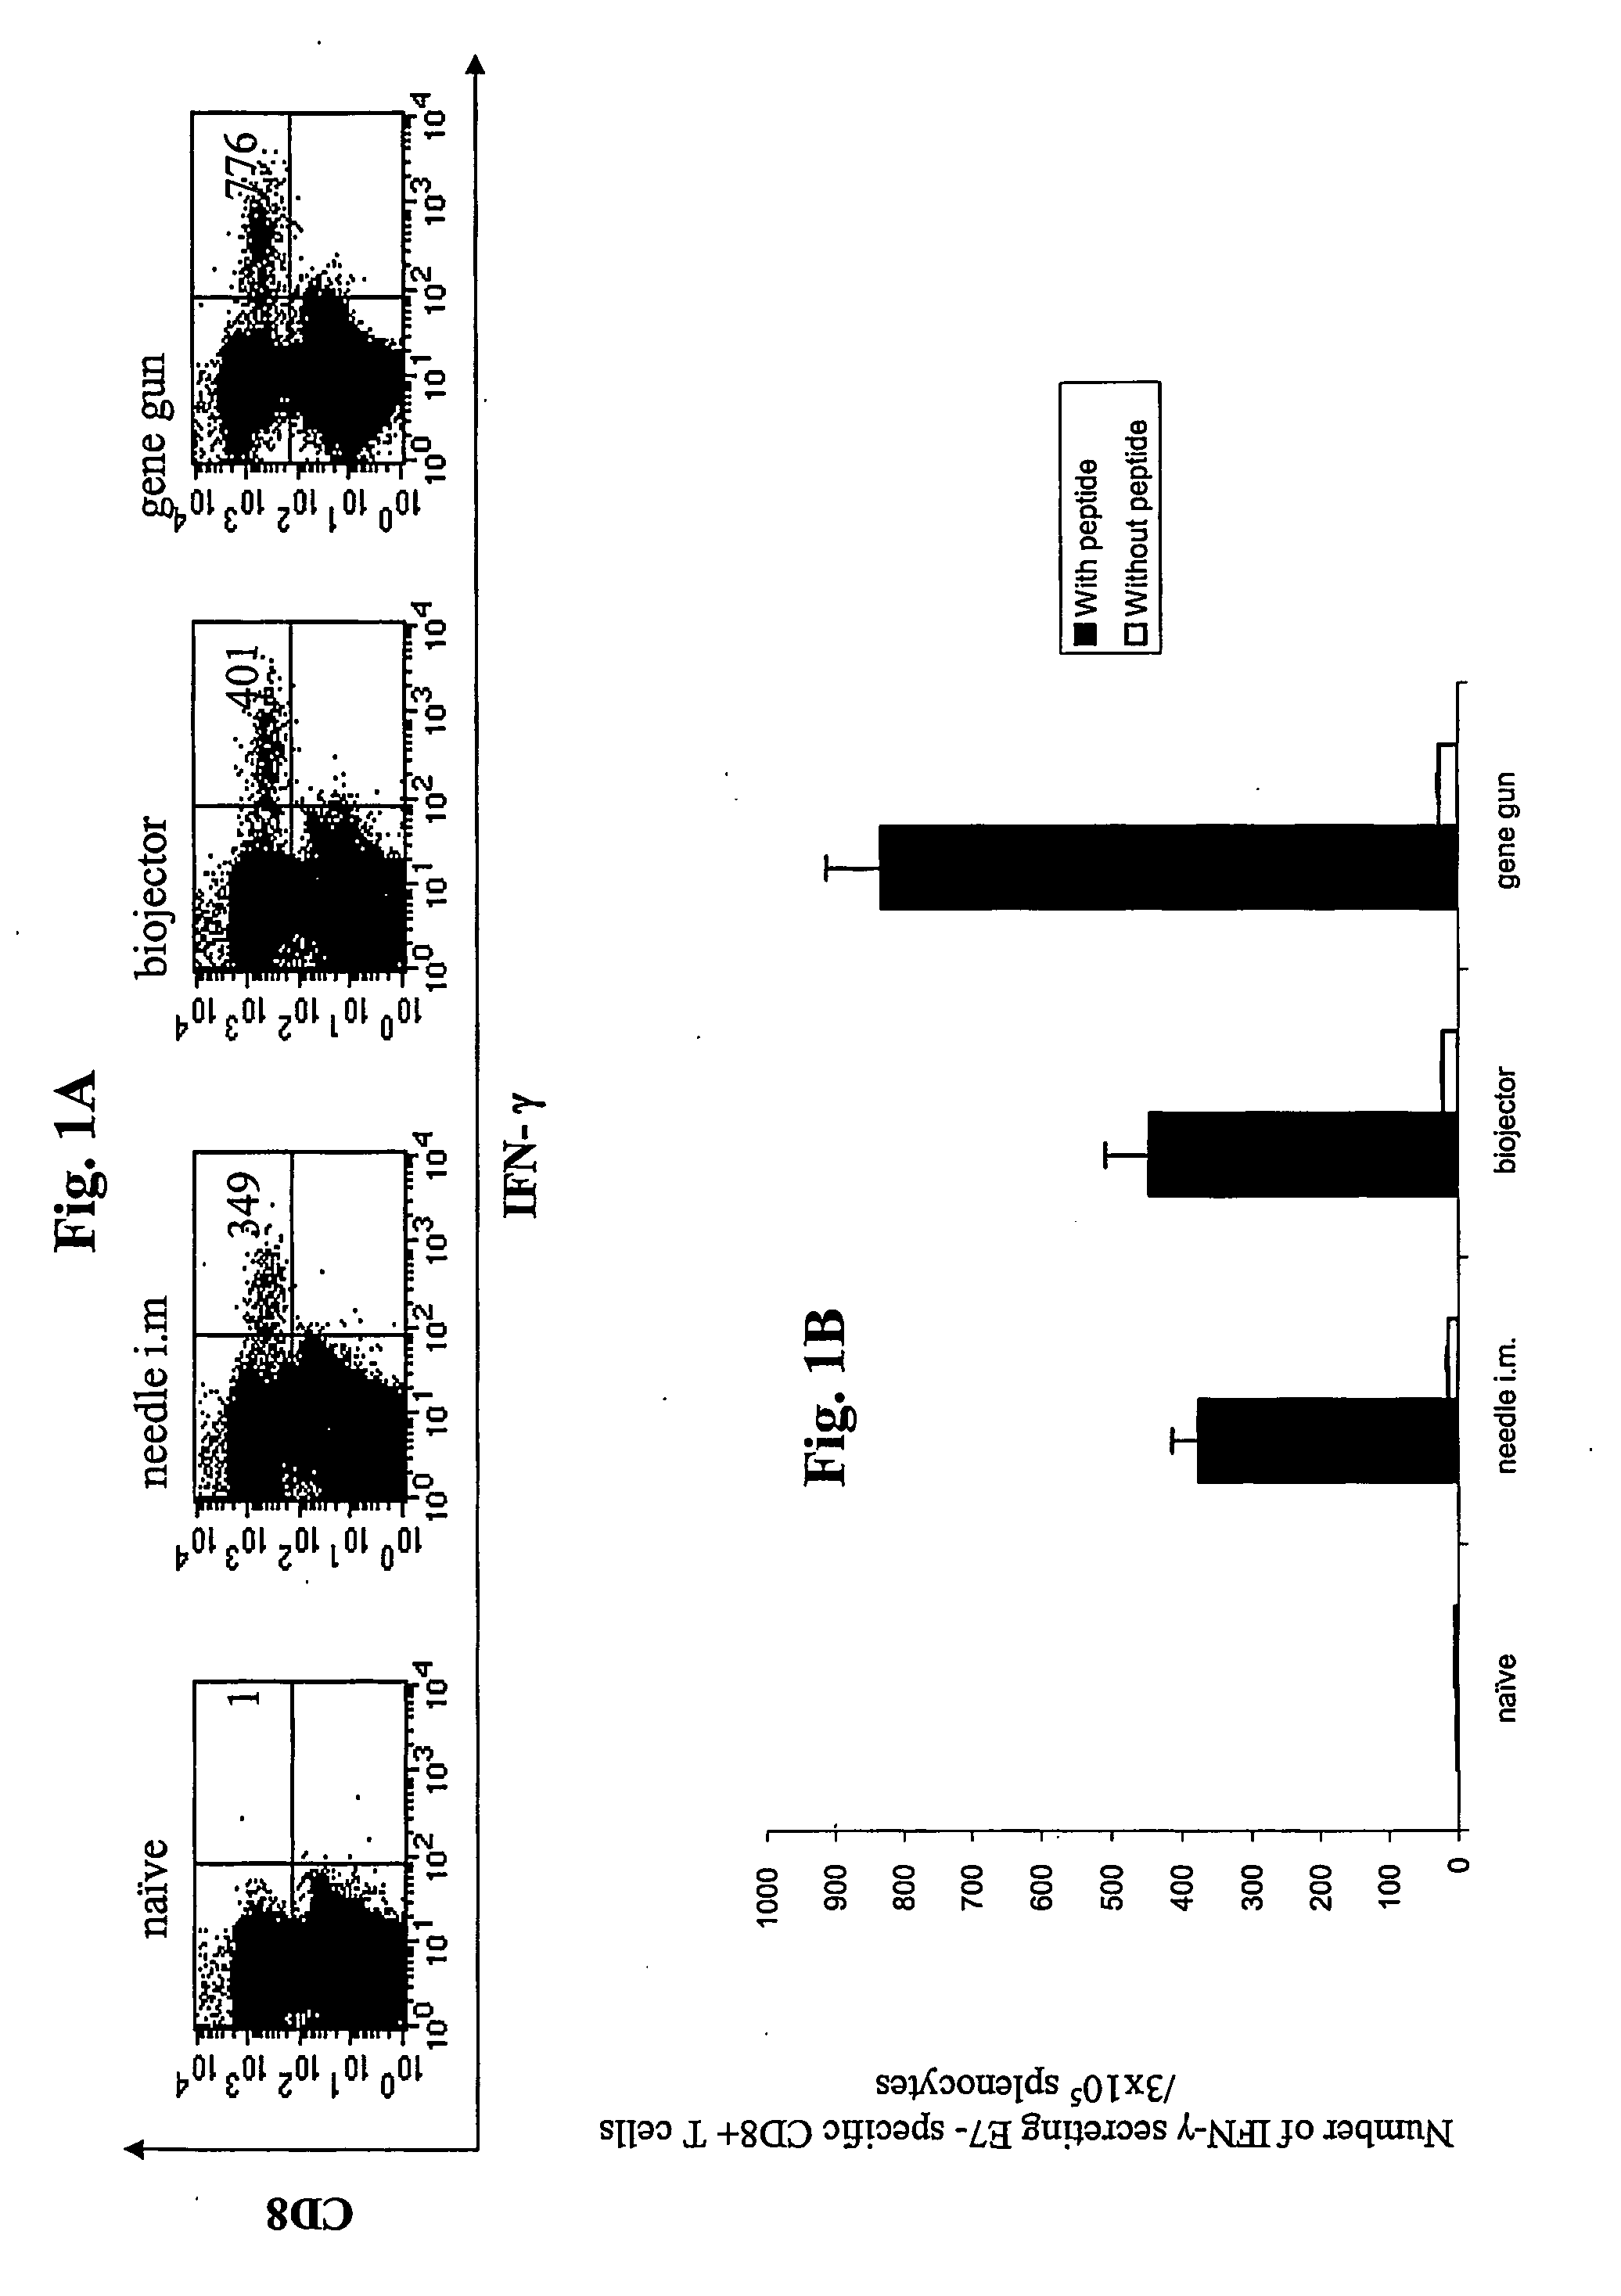 Anti-cancer DNA vaccine employing plasmids encoding signal sequence, mutant oncoprotein antigen, and heat shock protein